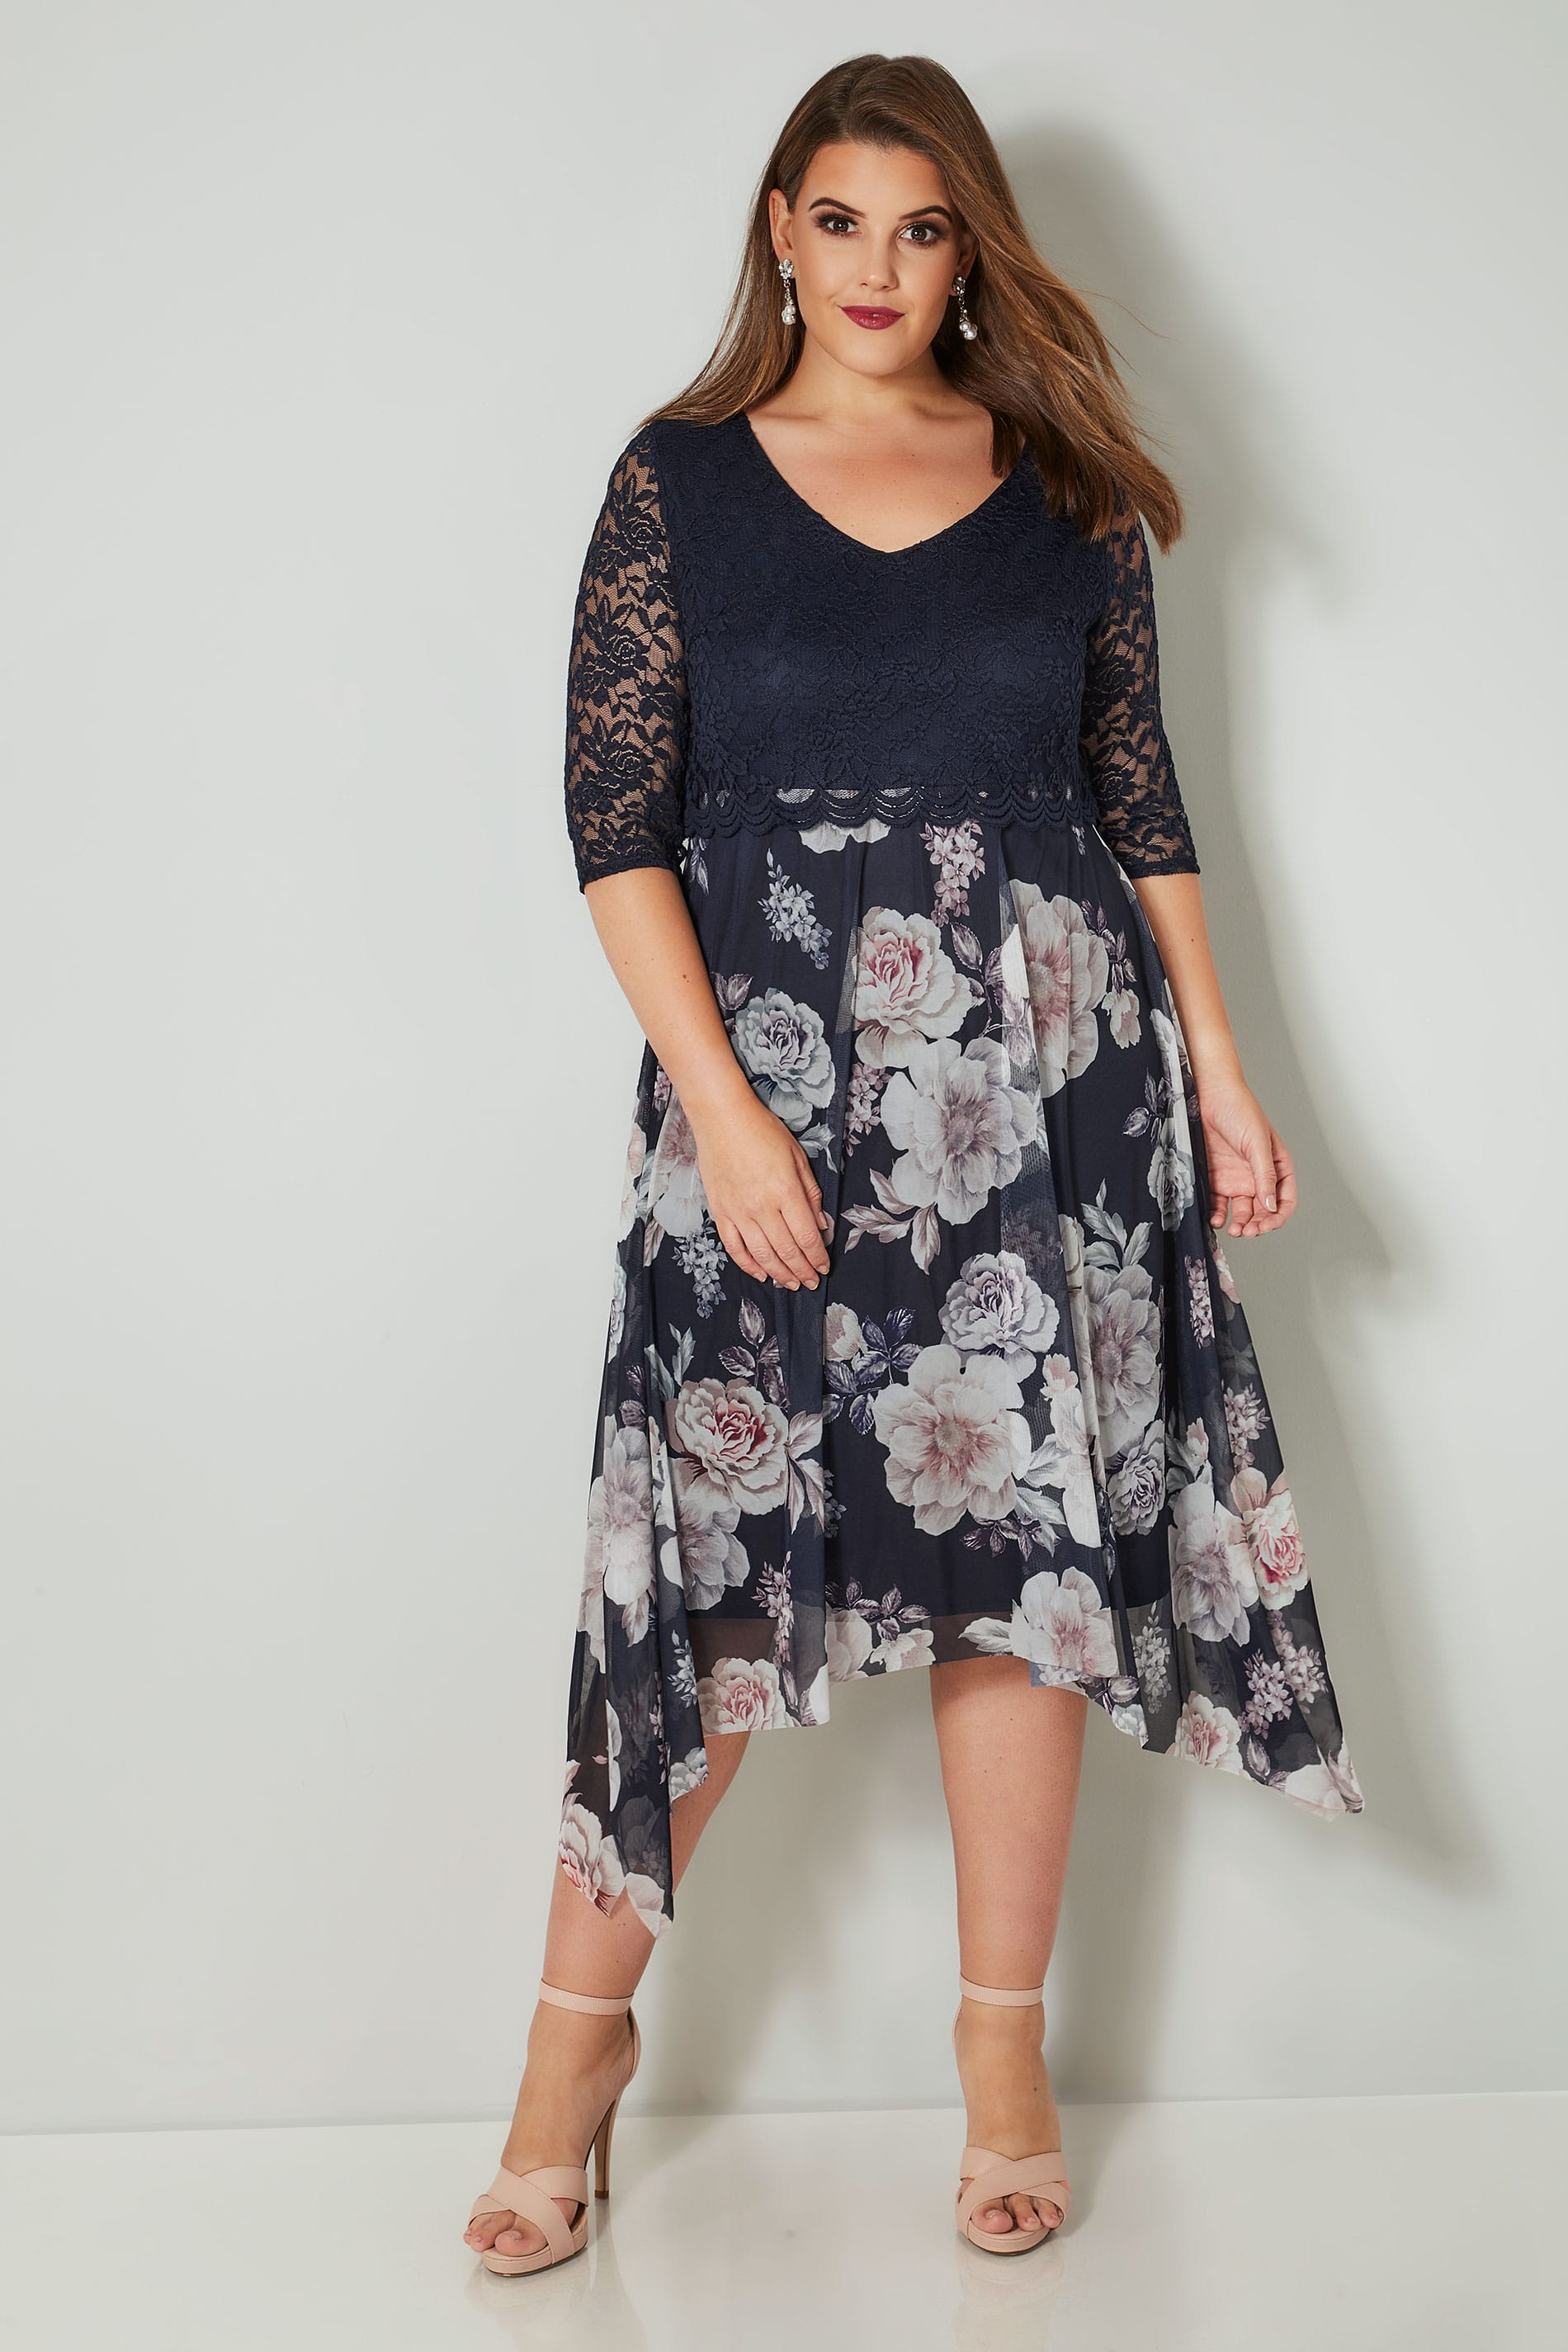 YOURS LONDON Navy Floral Dress With Lace Overlay, plus size 16 to 36